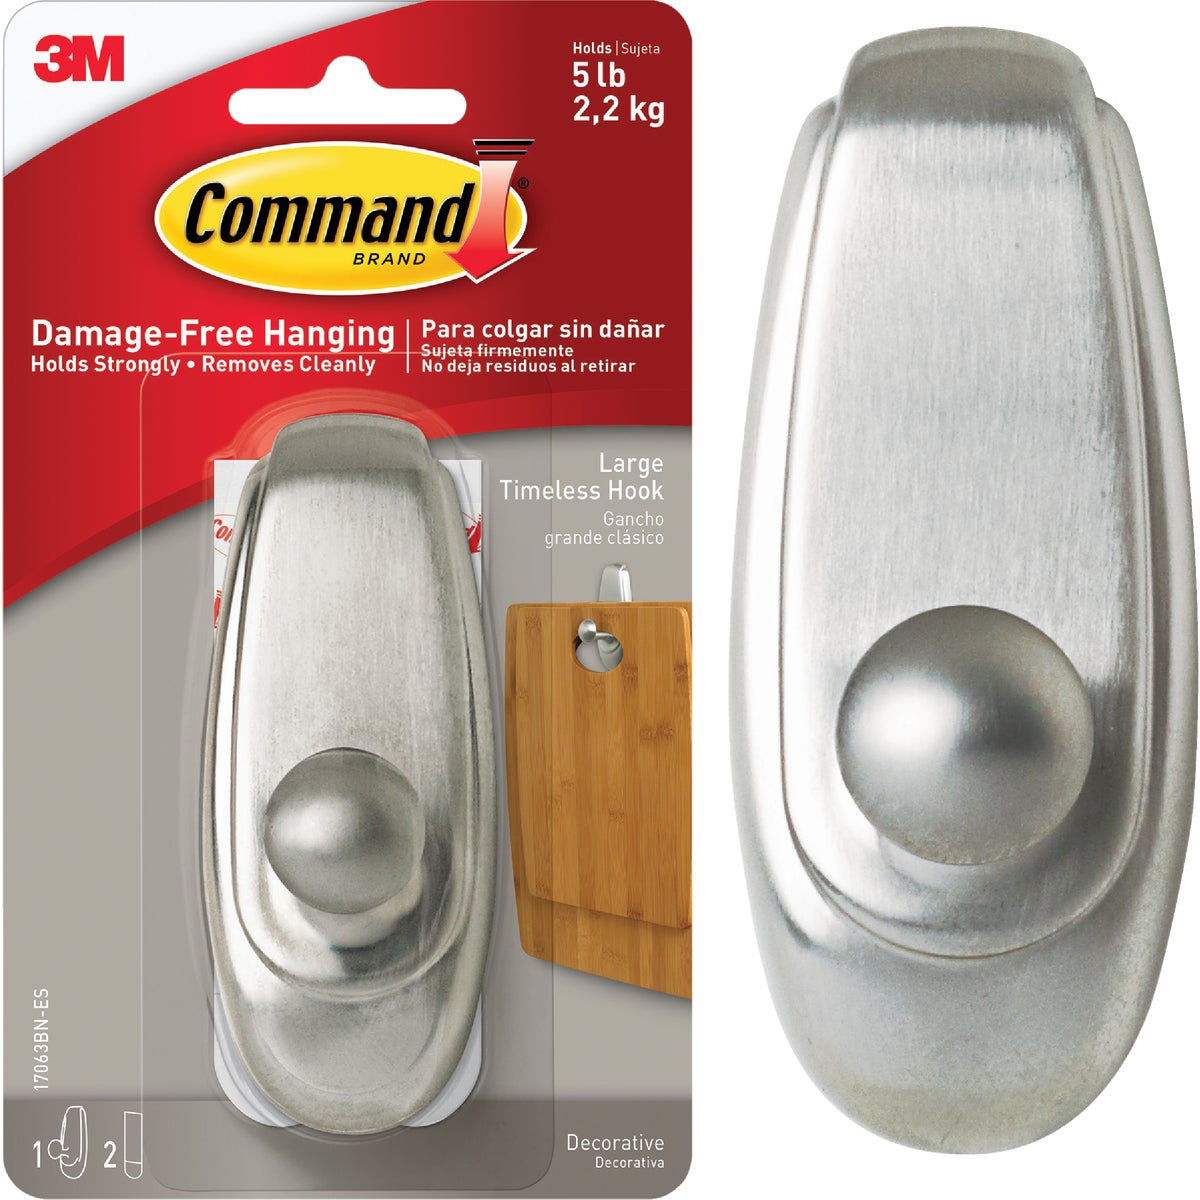 Item 607855, Command Decorative Hooks come in a variety of styles   from sophisticated 